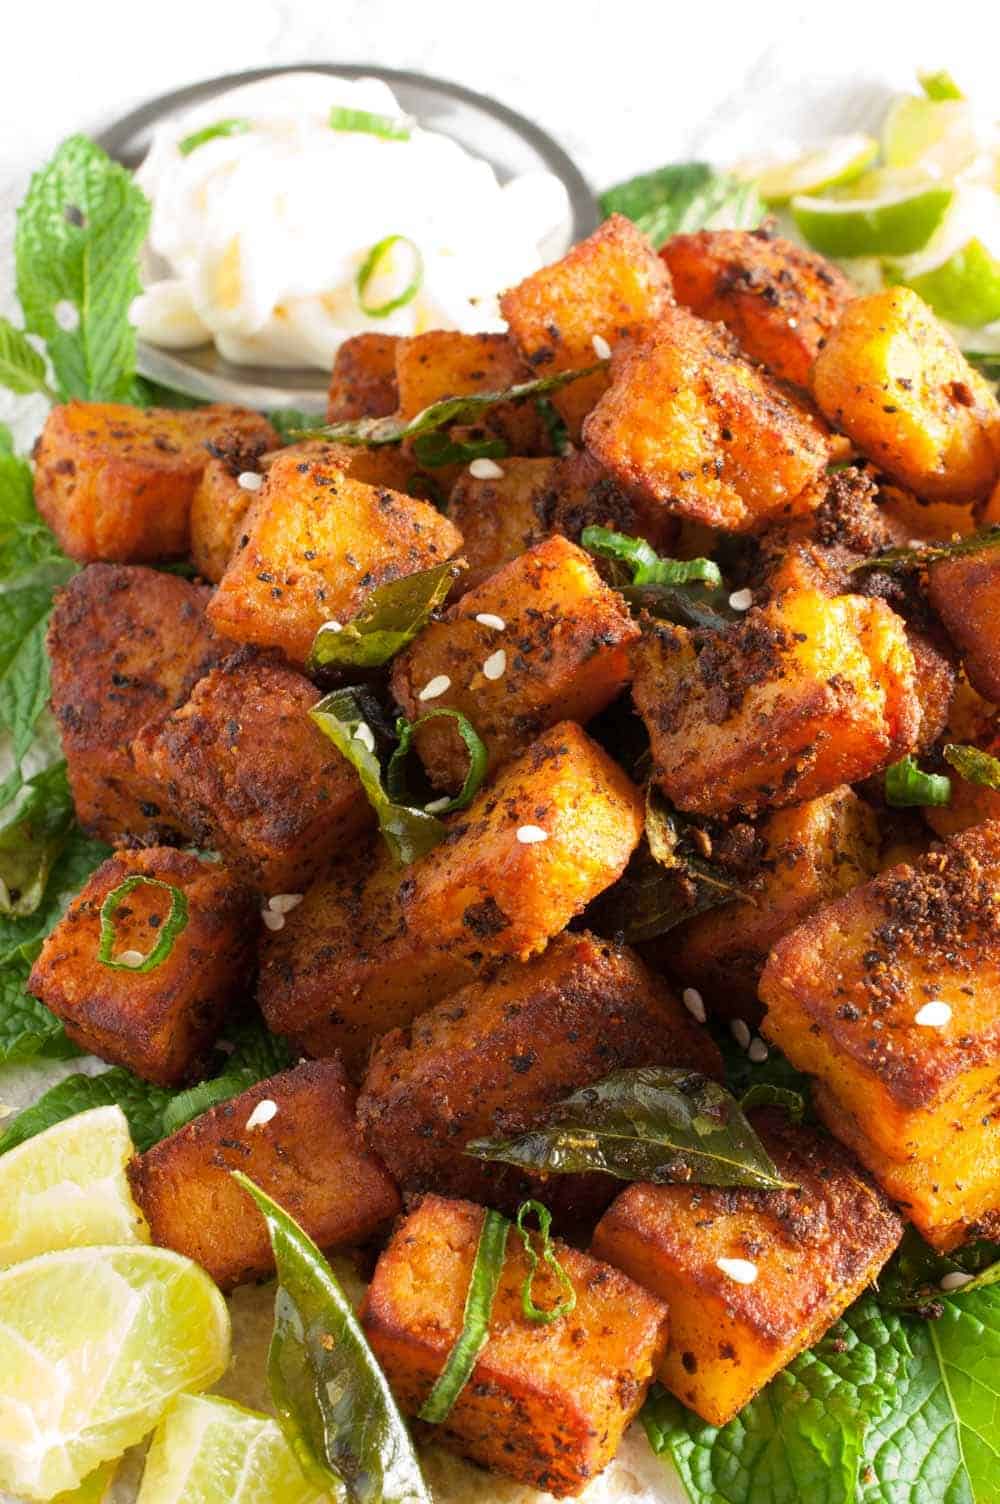 Paneer Masala Fry Recipe | How to make paneer fry | A Little Bit of Spice